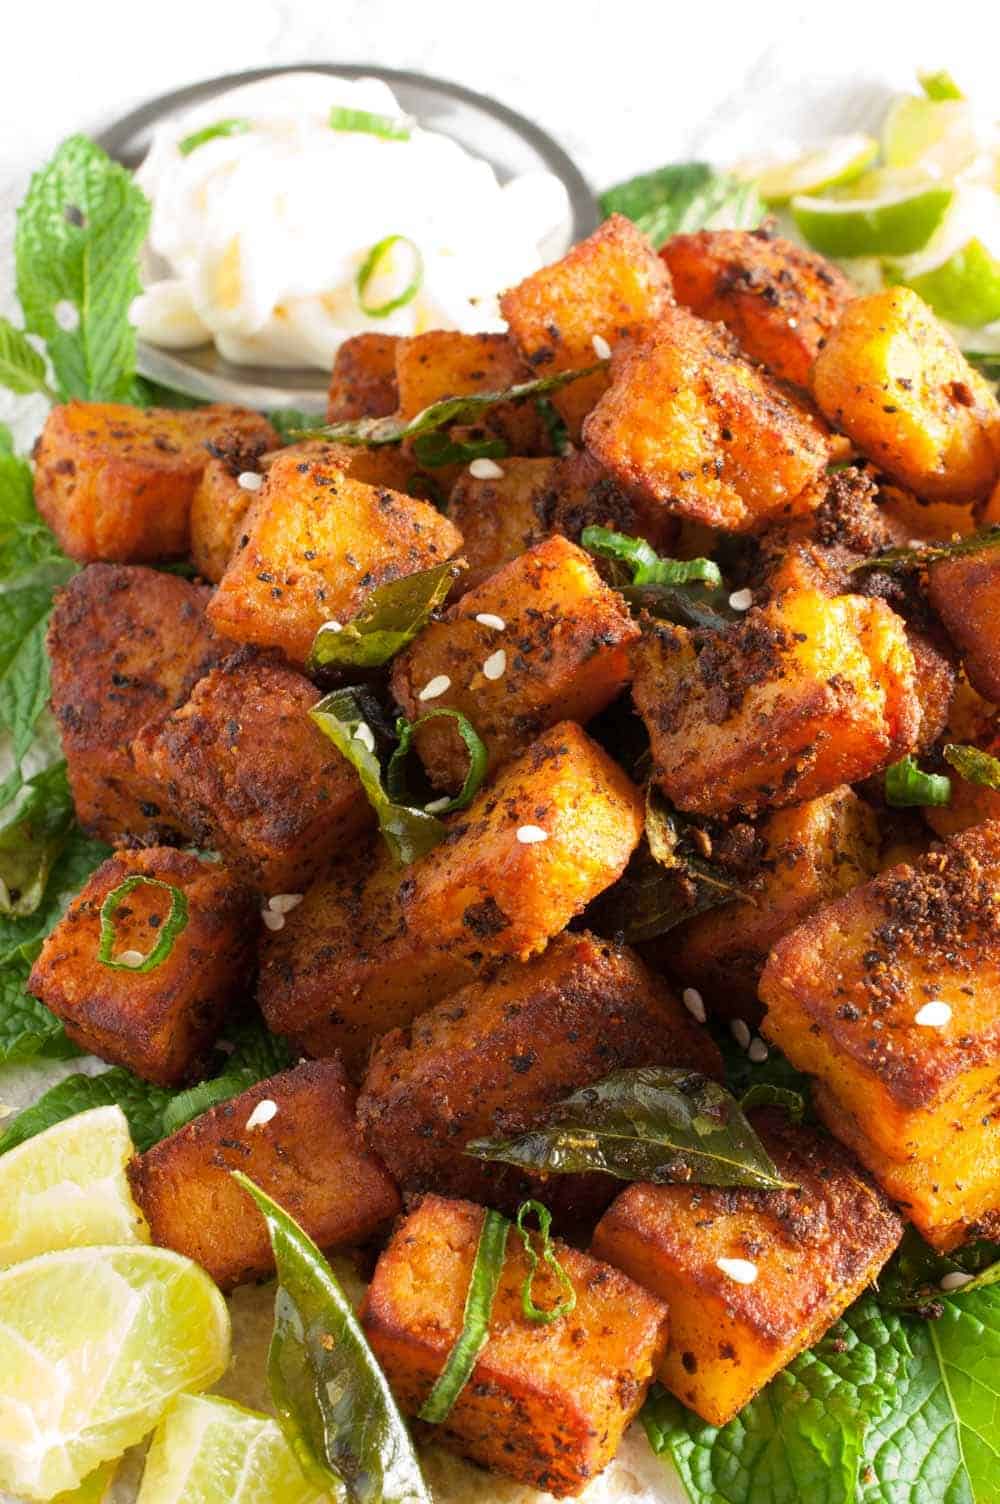 Paneer Masala Fry Recipe | How to make paneer fry | A Little Bit of Spice